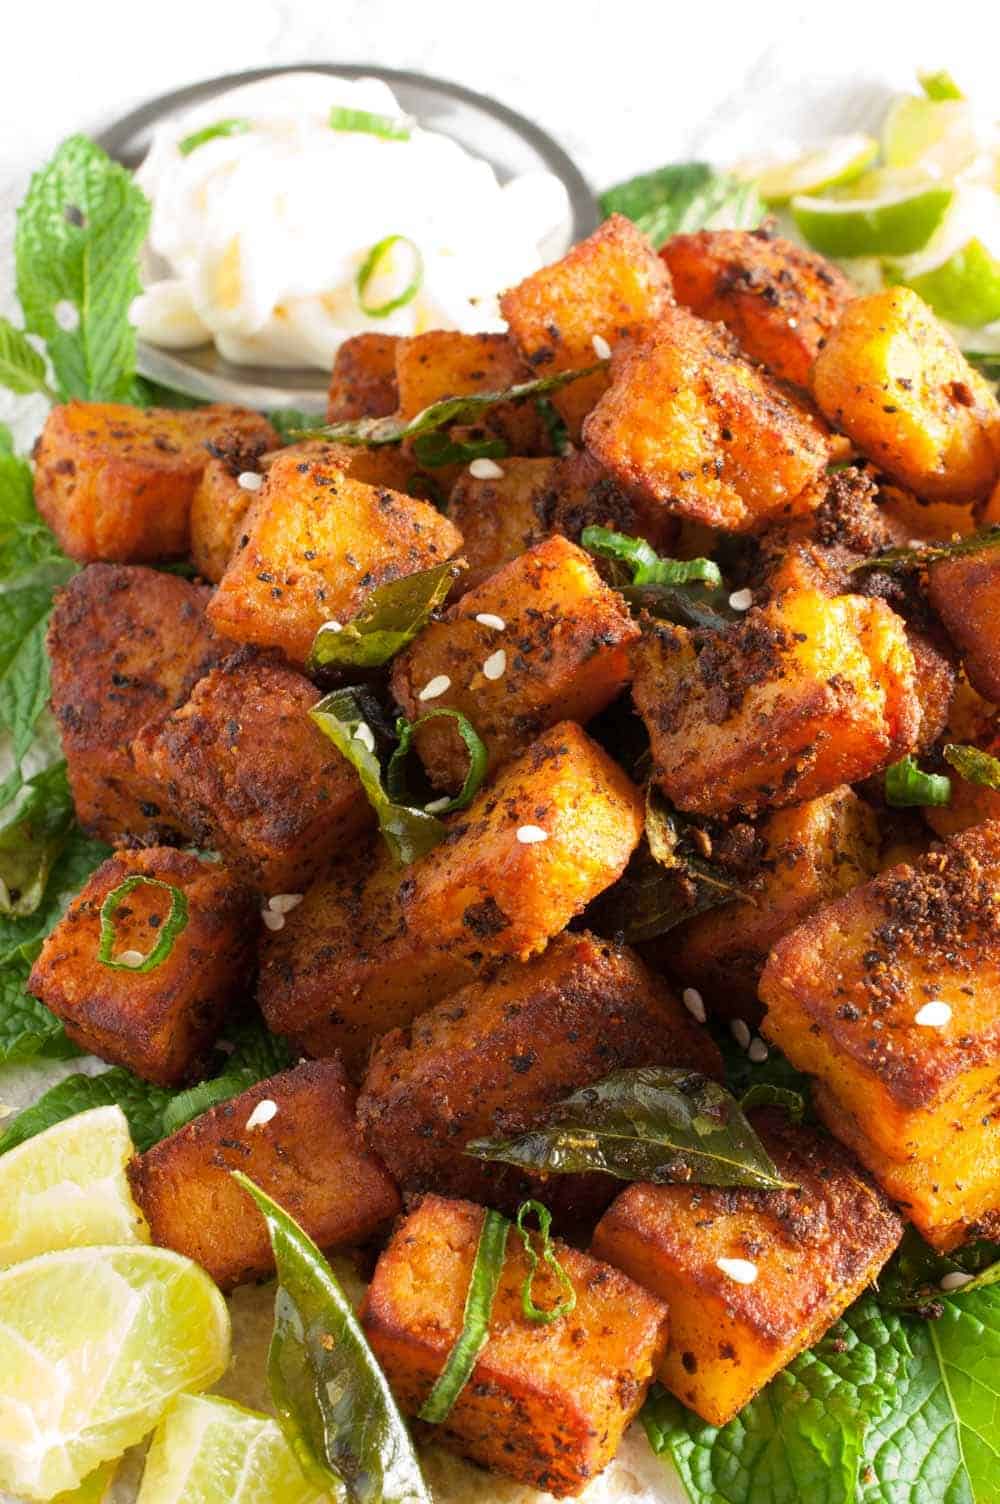 Paneer Masala Fry Recipe | How to make paneer fry | A Little Bit of Spice